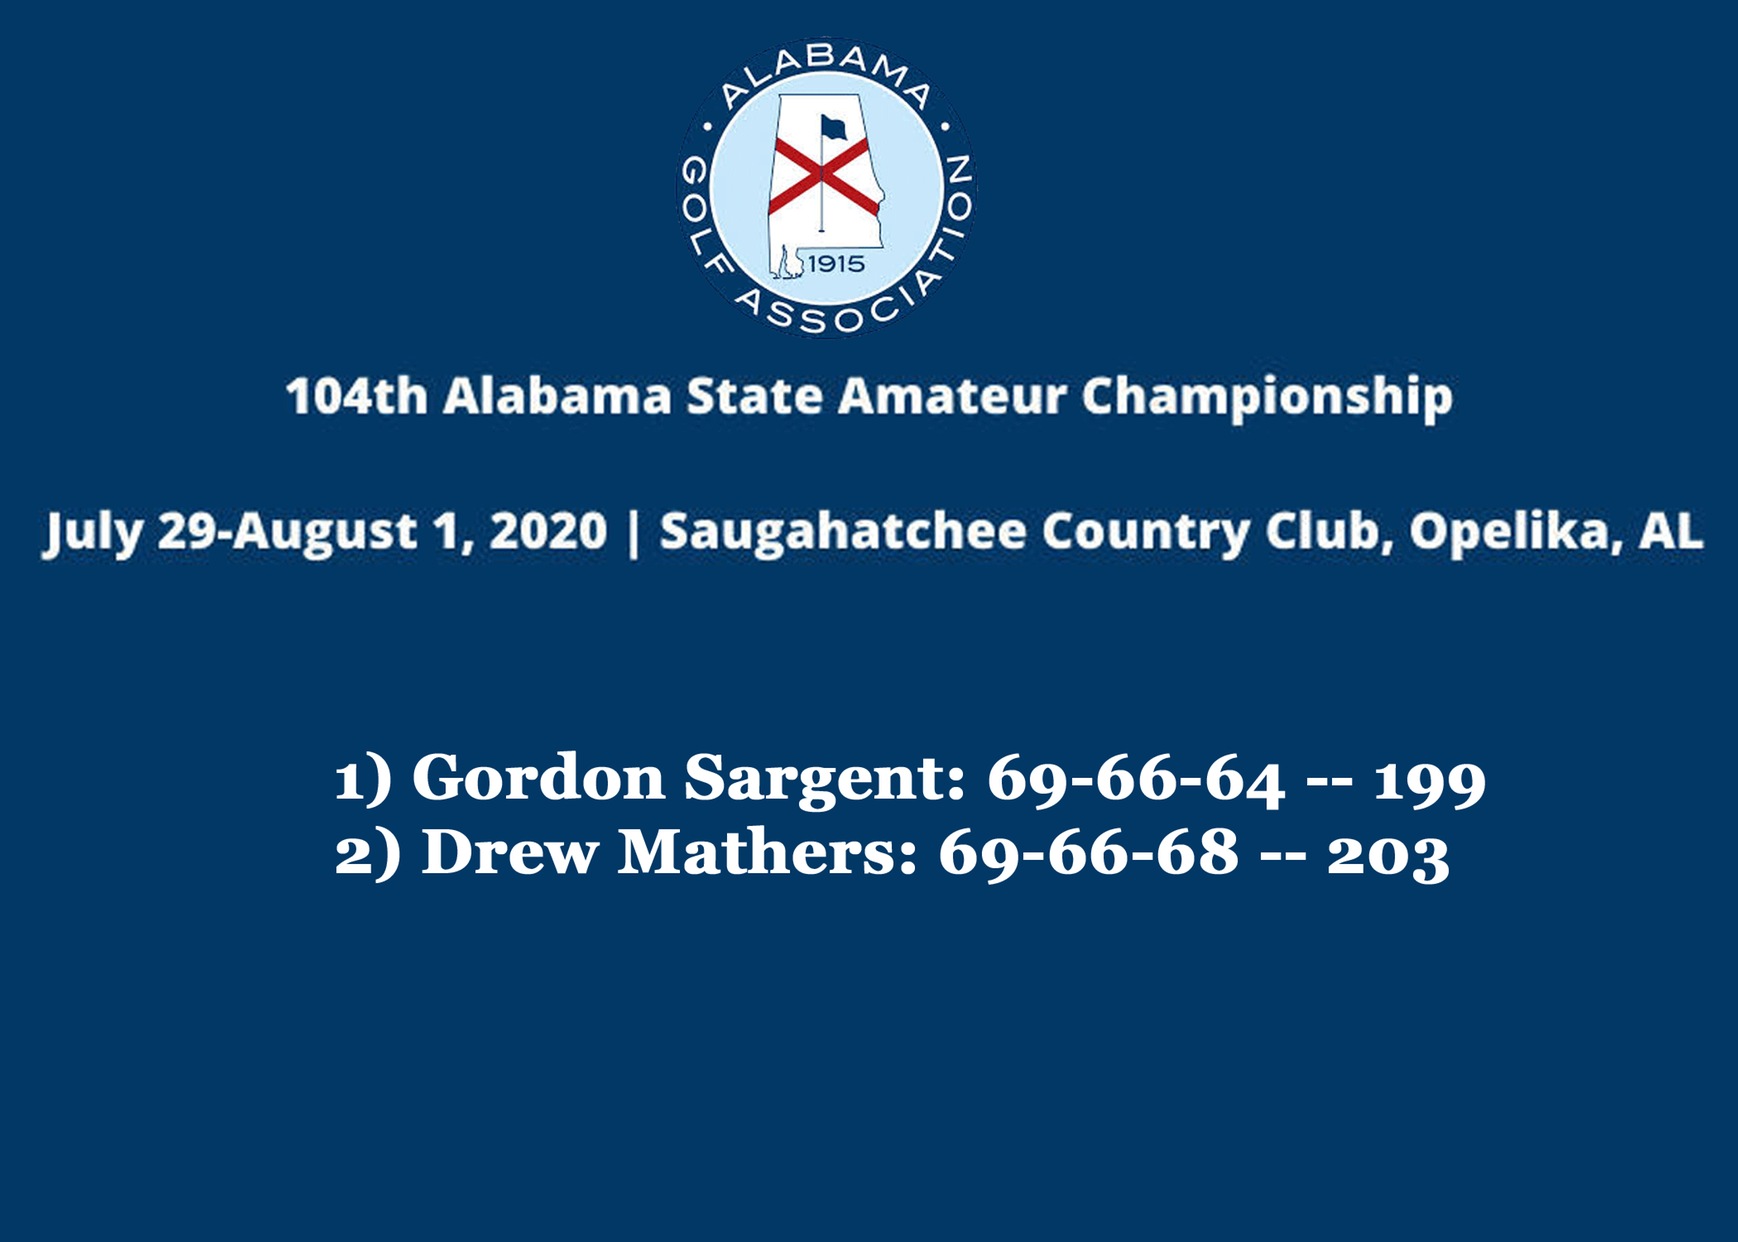 Mathers four strokes out of 1st entering final round of Alabama State Amateur